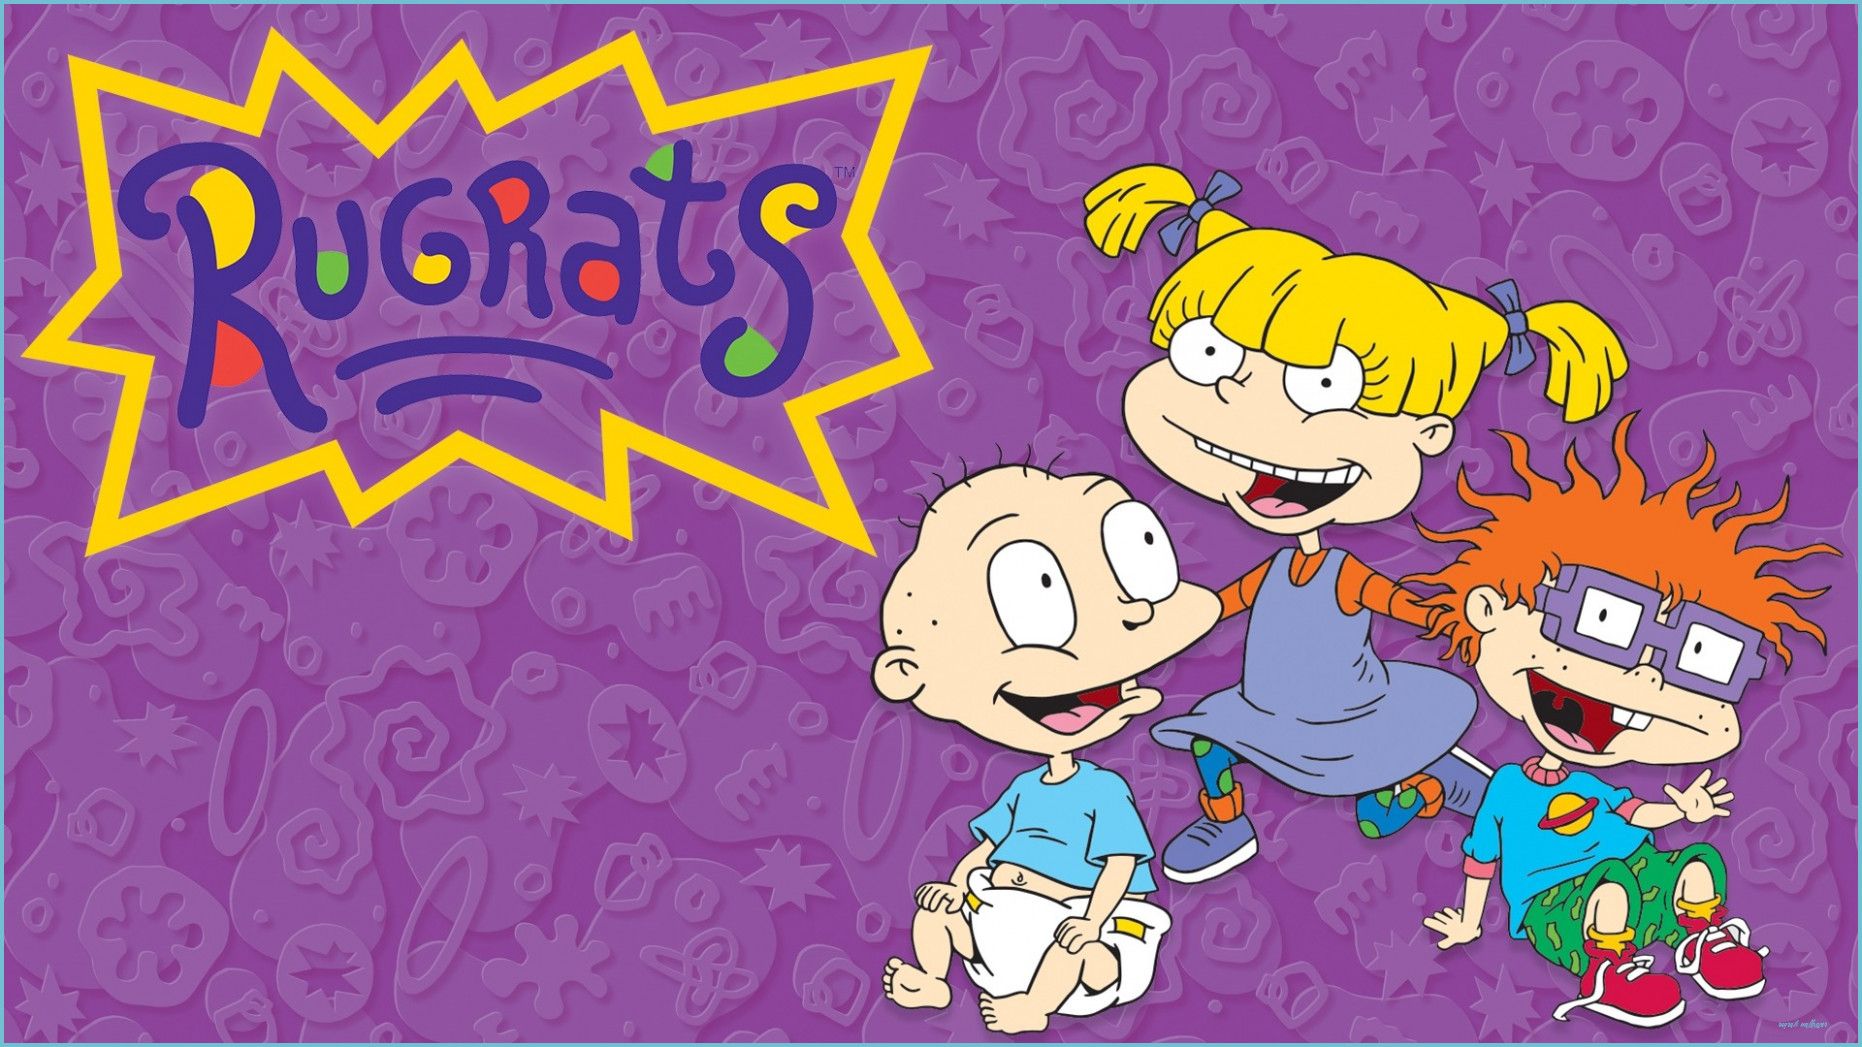 Rugrats Wallpaper: 10 Image, Movie & TV Category